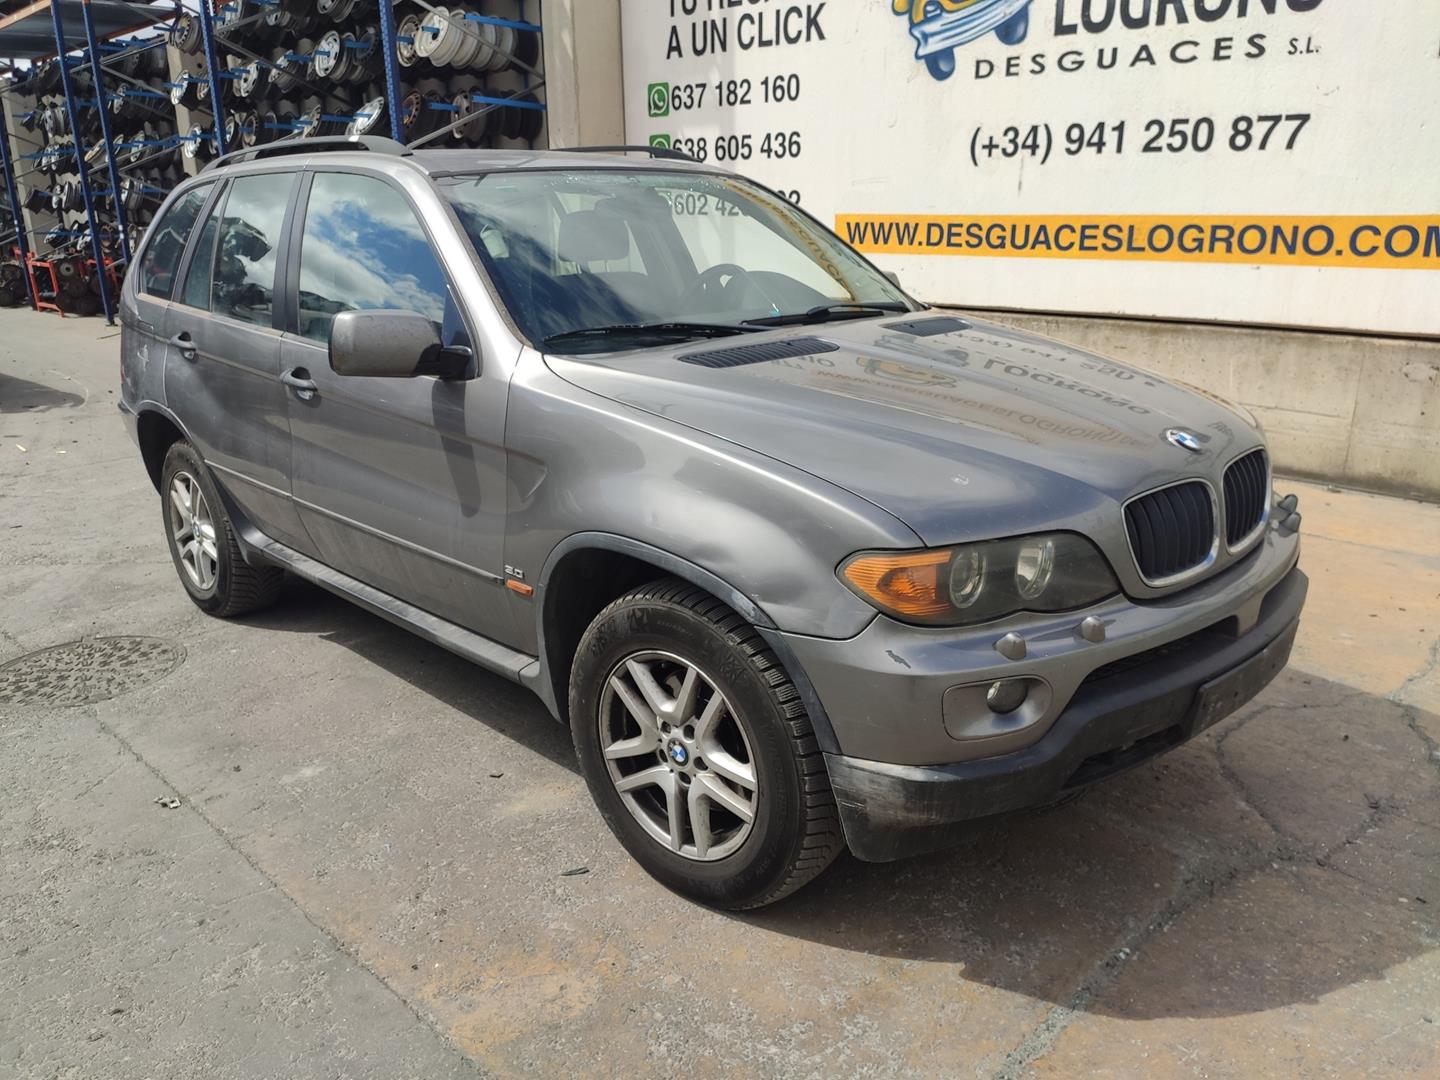 BMW X5 E53 (1999-2006) Other Body Parts 8408706, 51718408706 19898407